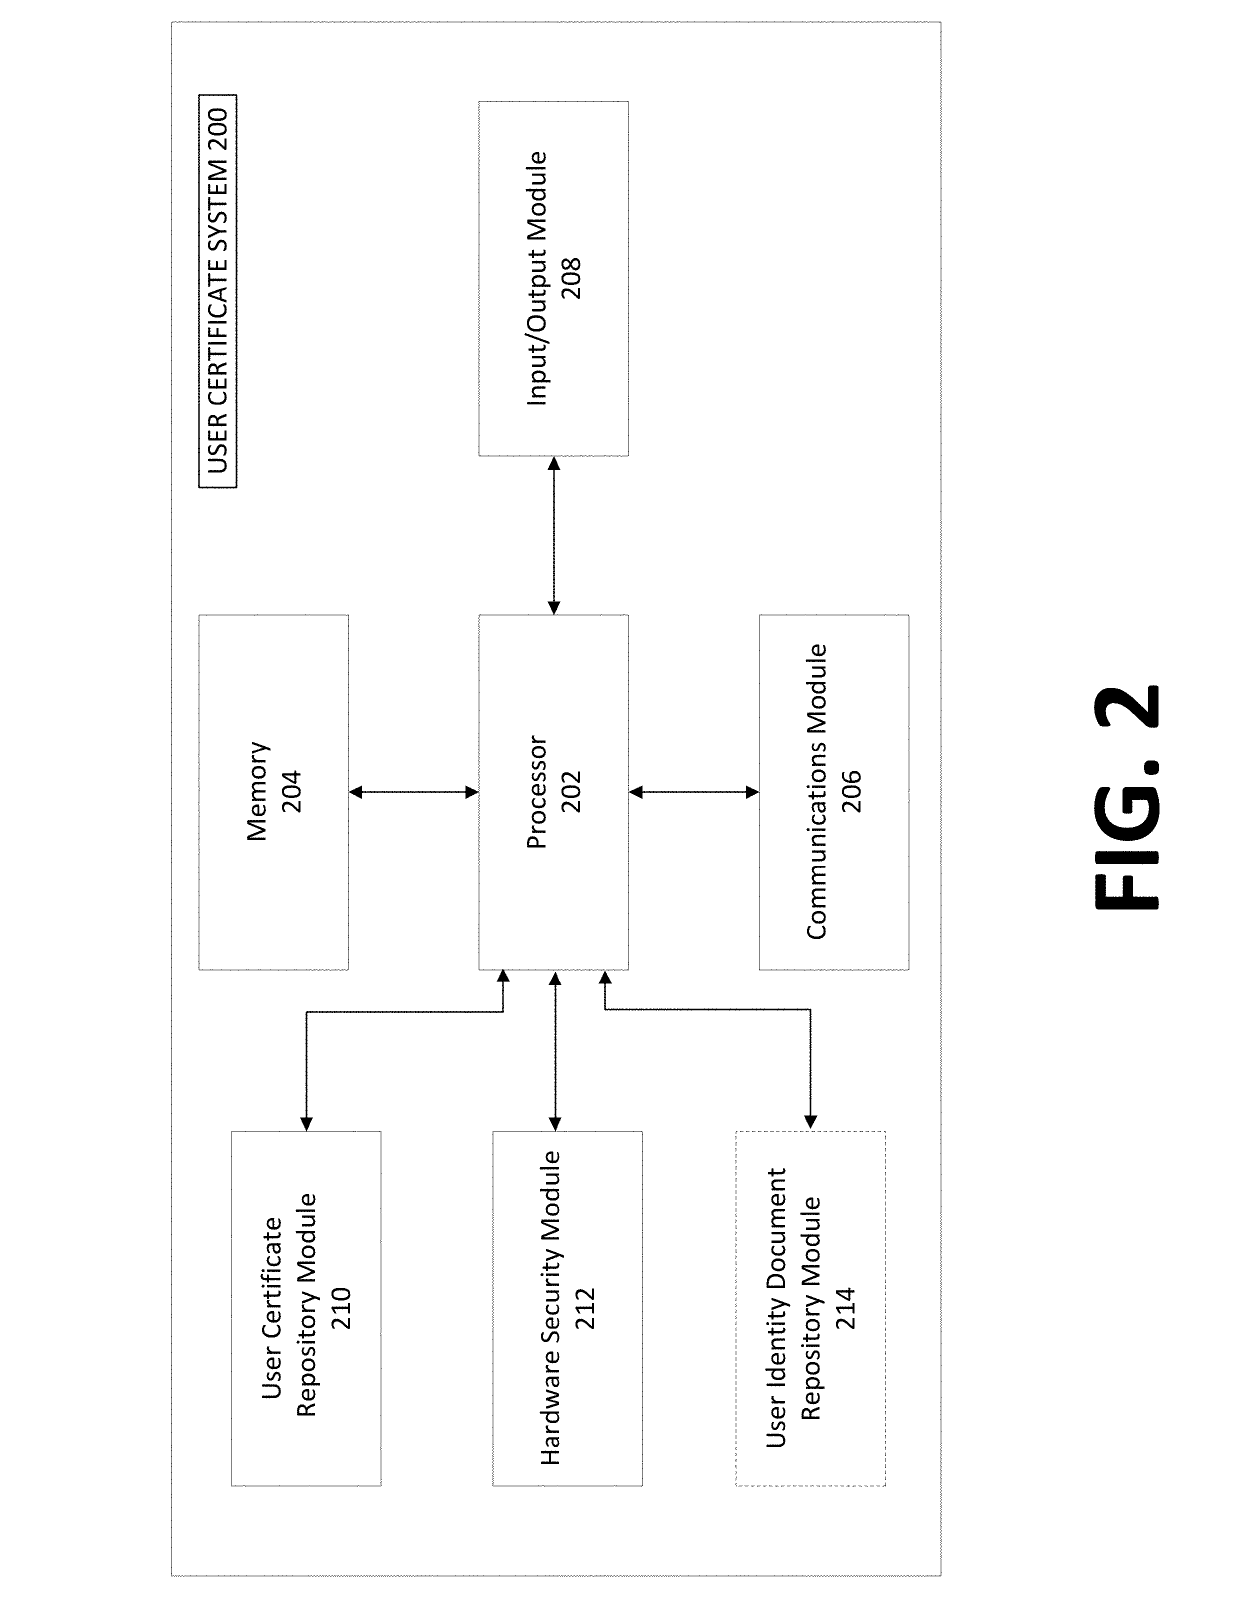 Identity-linked authentication through a user certificate system